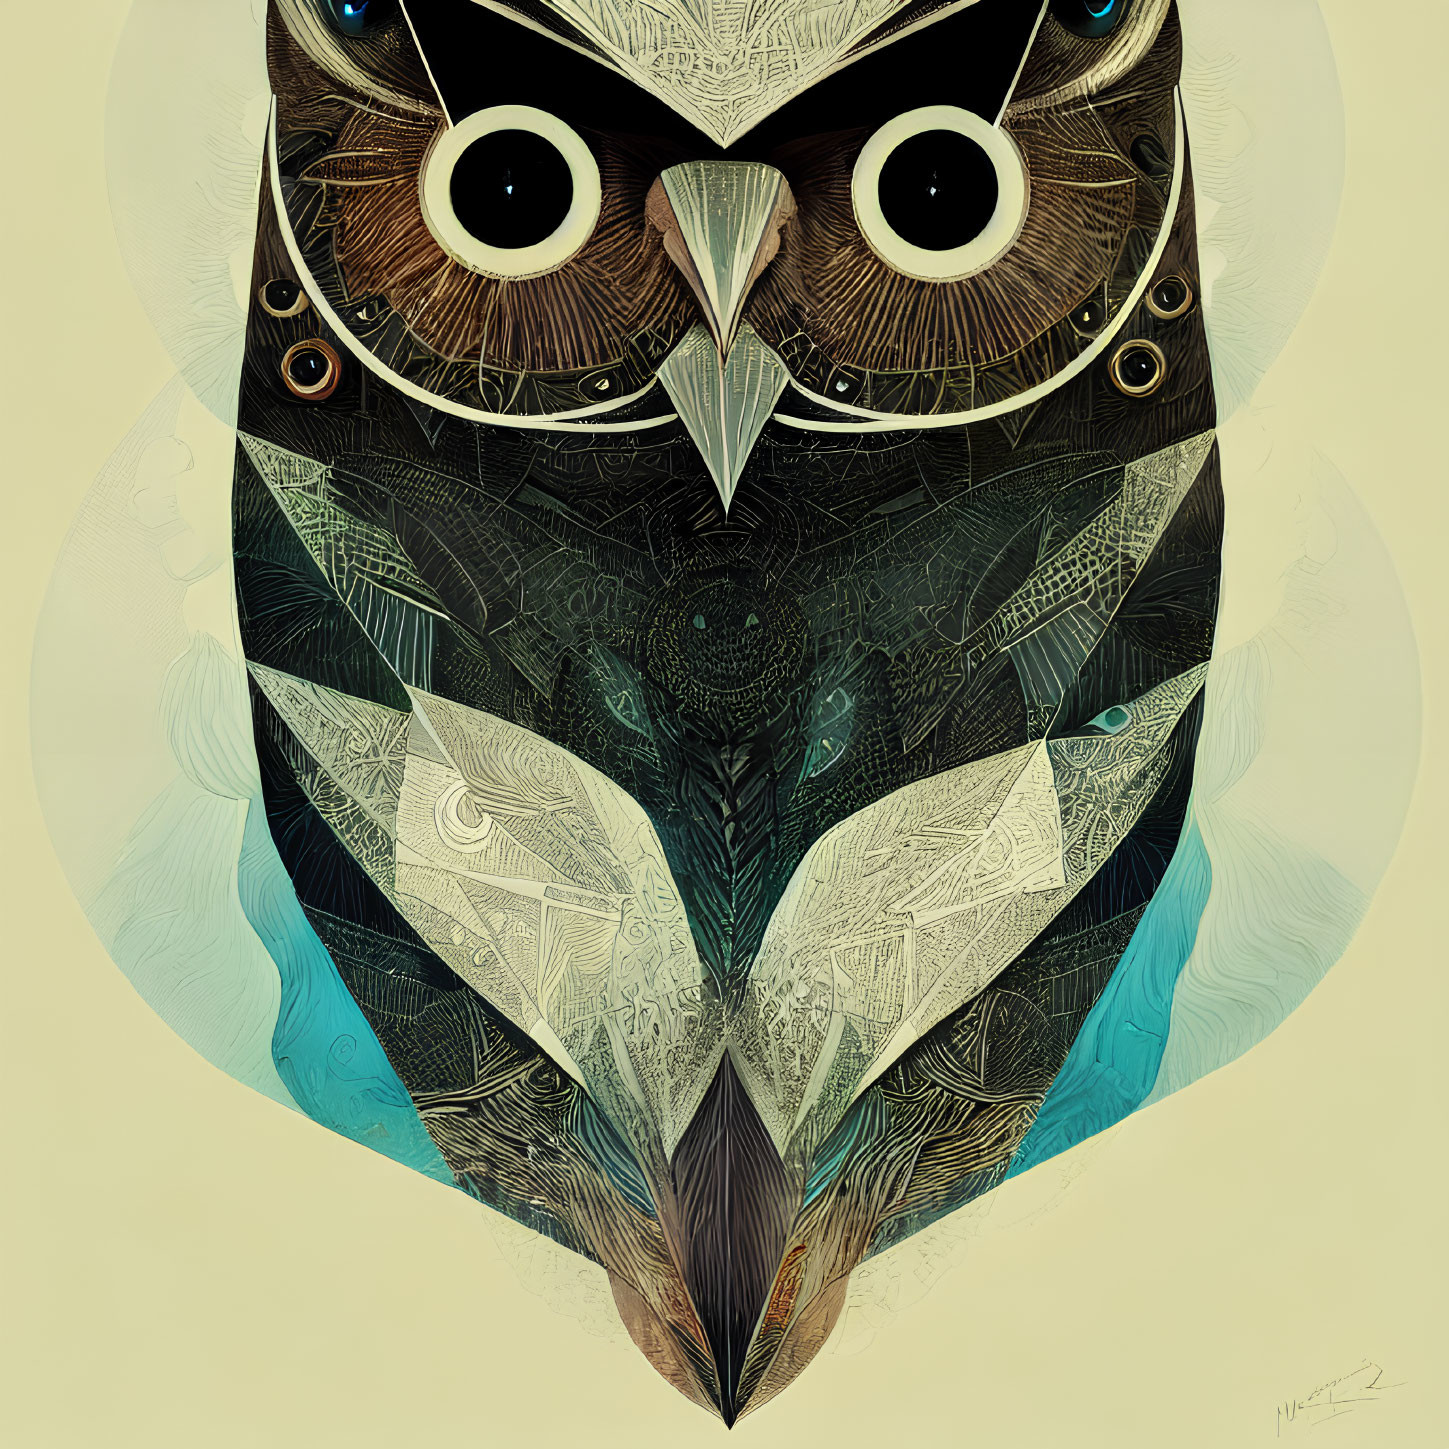 Colorful Owl Illustration with Detailed Patterns and Big Eyes